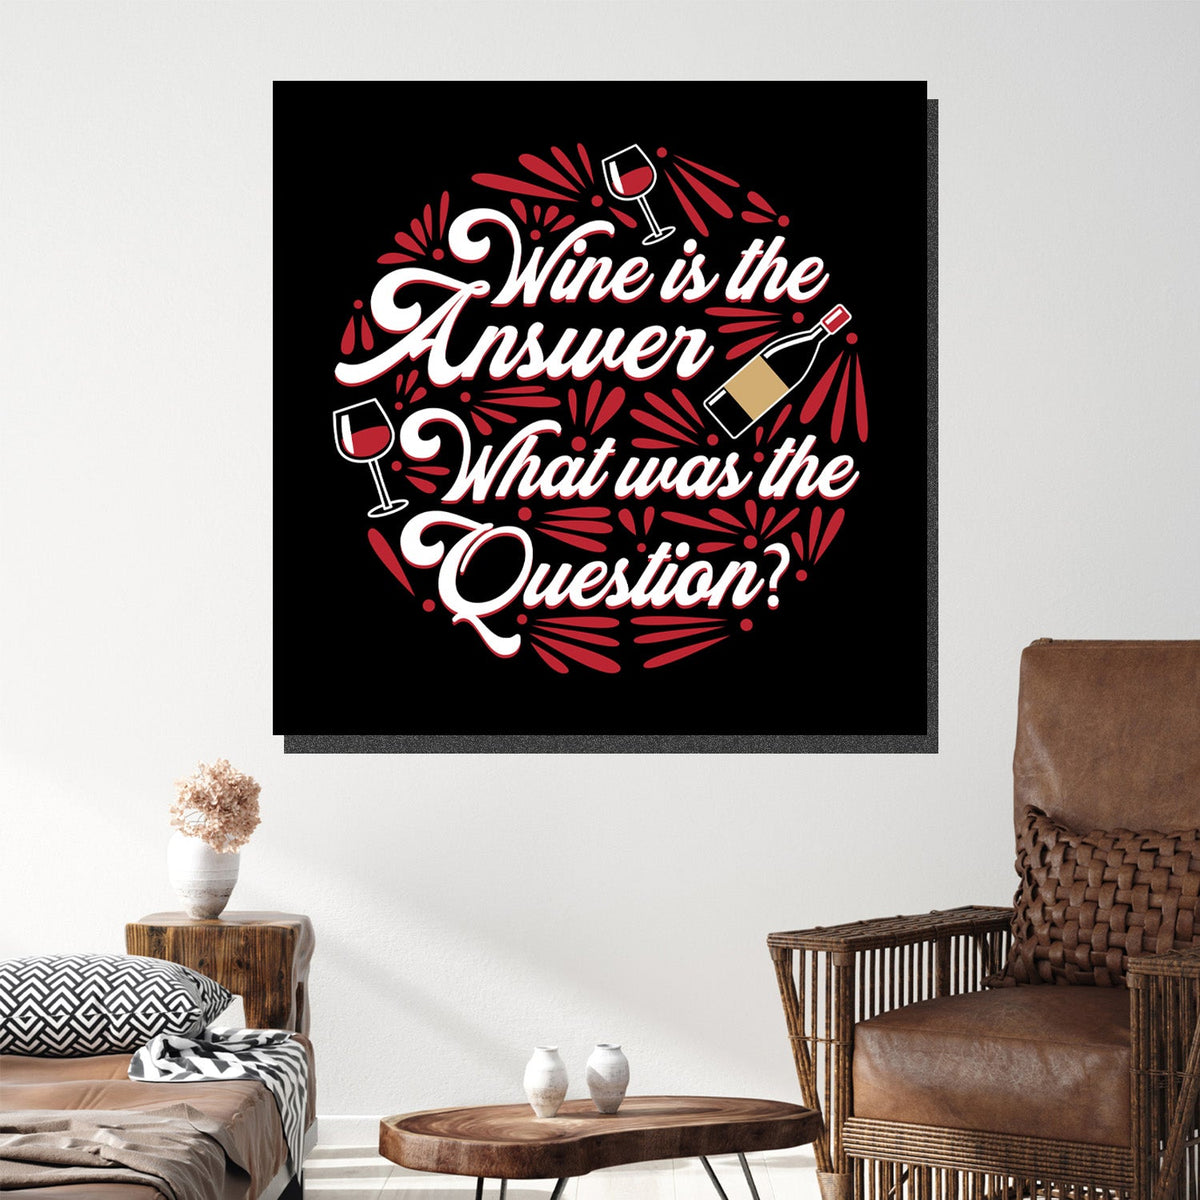 https://cdn.shopify.com/s/files/1/0387/9986/8044/products/WineistheAnswerCanvasArtprintStretched-3.jpg